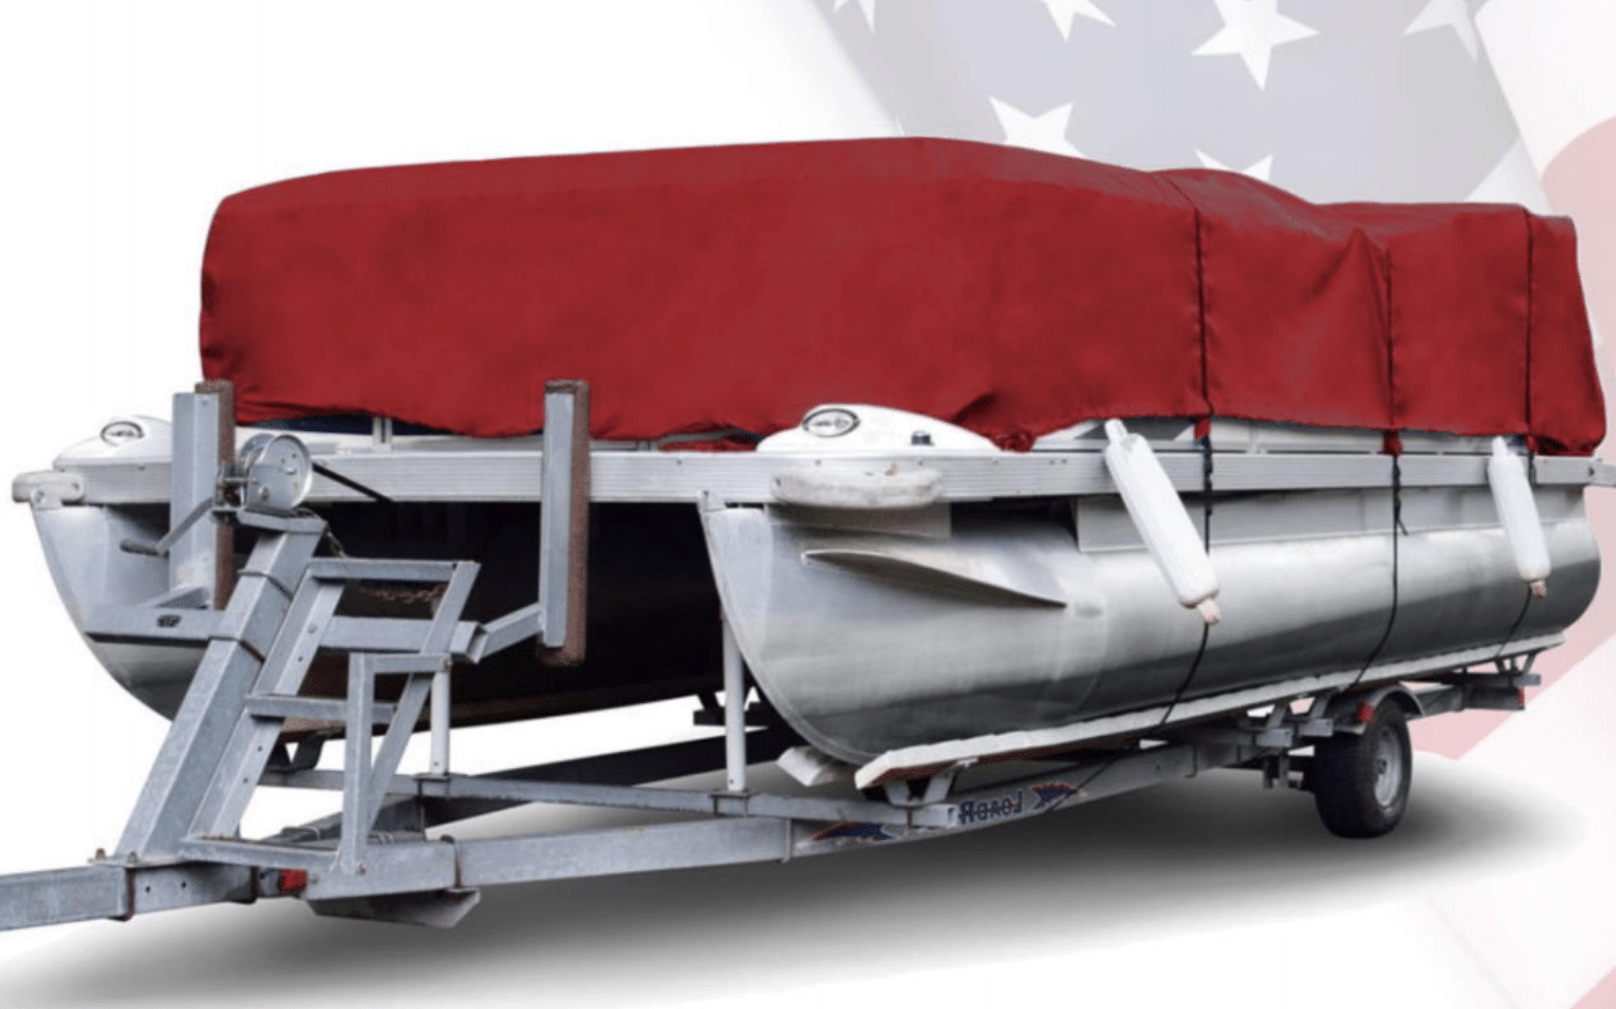 Factory Fit Tracker Boat Covers by National Boat Covers